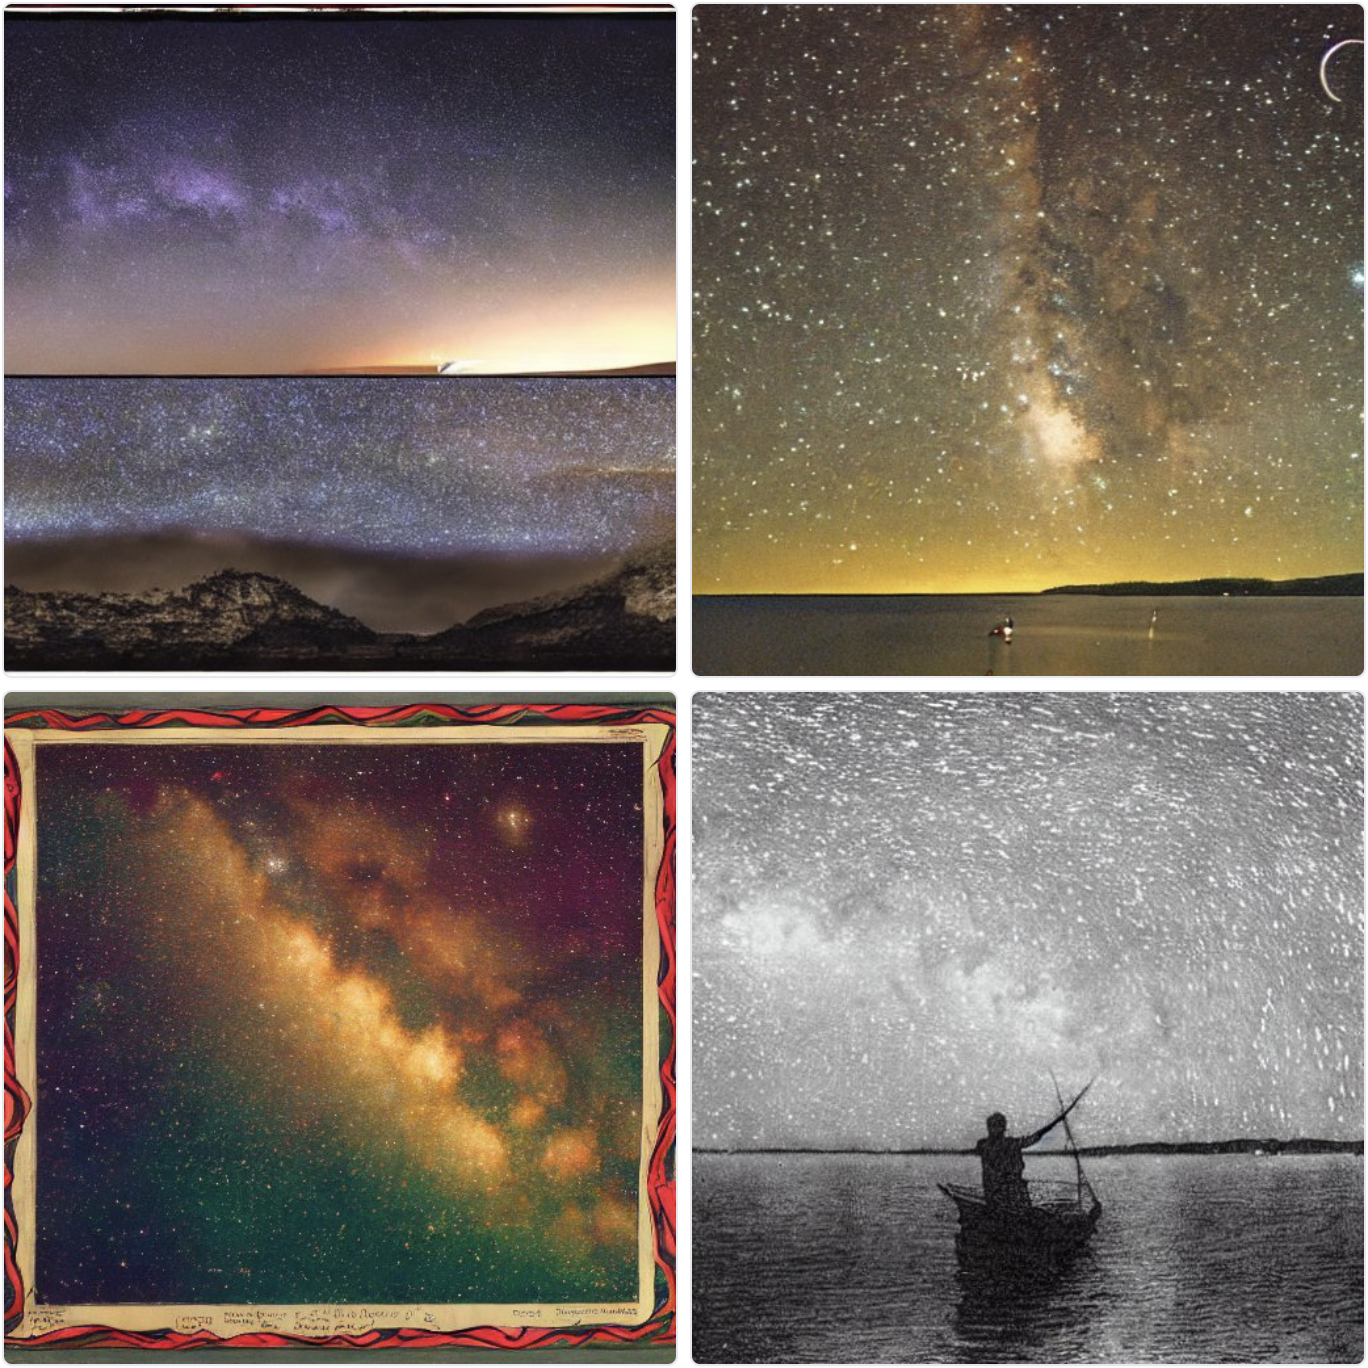 examples of starry skies generated with an AI art program